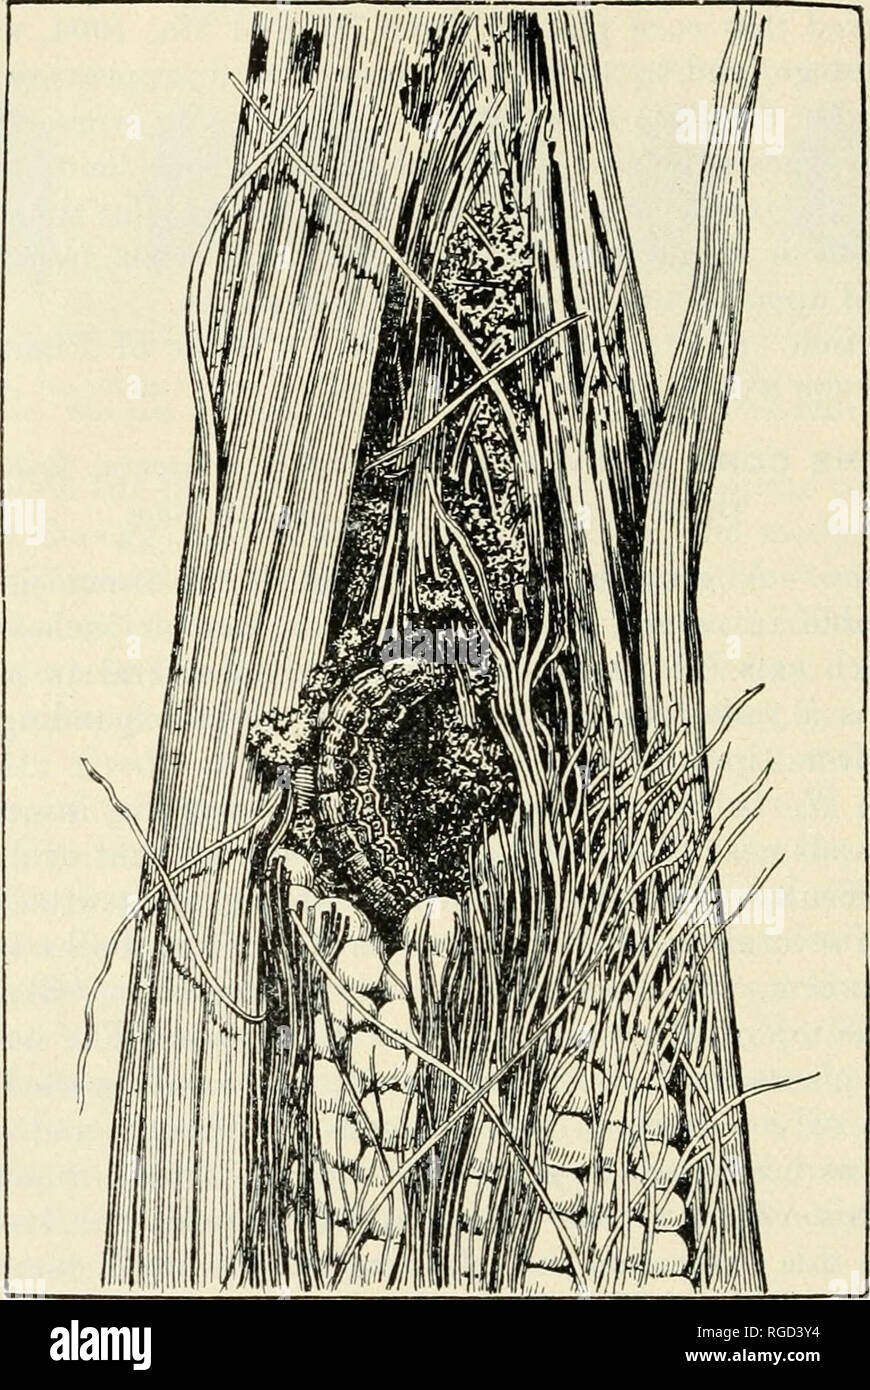 . The Bulletin of the North Carolina Department of Agriculture. Agriculture -- North Carolina. 46 The Bulletiiv.. Fig. 15.—The Corn Ear-worm, showing the destructive larva at work in ear of corn. (After Quaintance, Bureau Ent., U. S. Dept. Agr.) Life-history and Habits.^—The winter is passed in the pupa stage, under the surface of the ground. The adult moths come out in spring or early summer and, being very active fliers, wander Avhither they will in search of nectar-bearing flowers or suitable plants upon which to place the eggs. When corn is the object of attack the eggs are laid on the sil Stock Photo